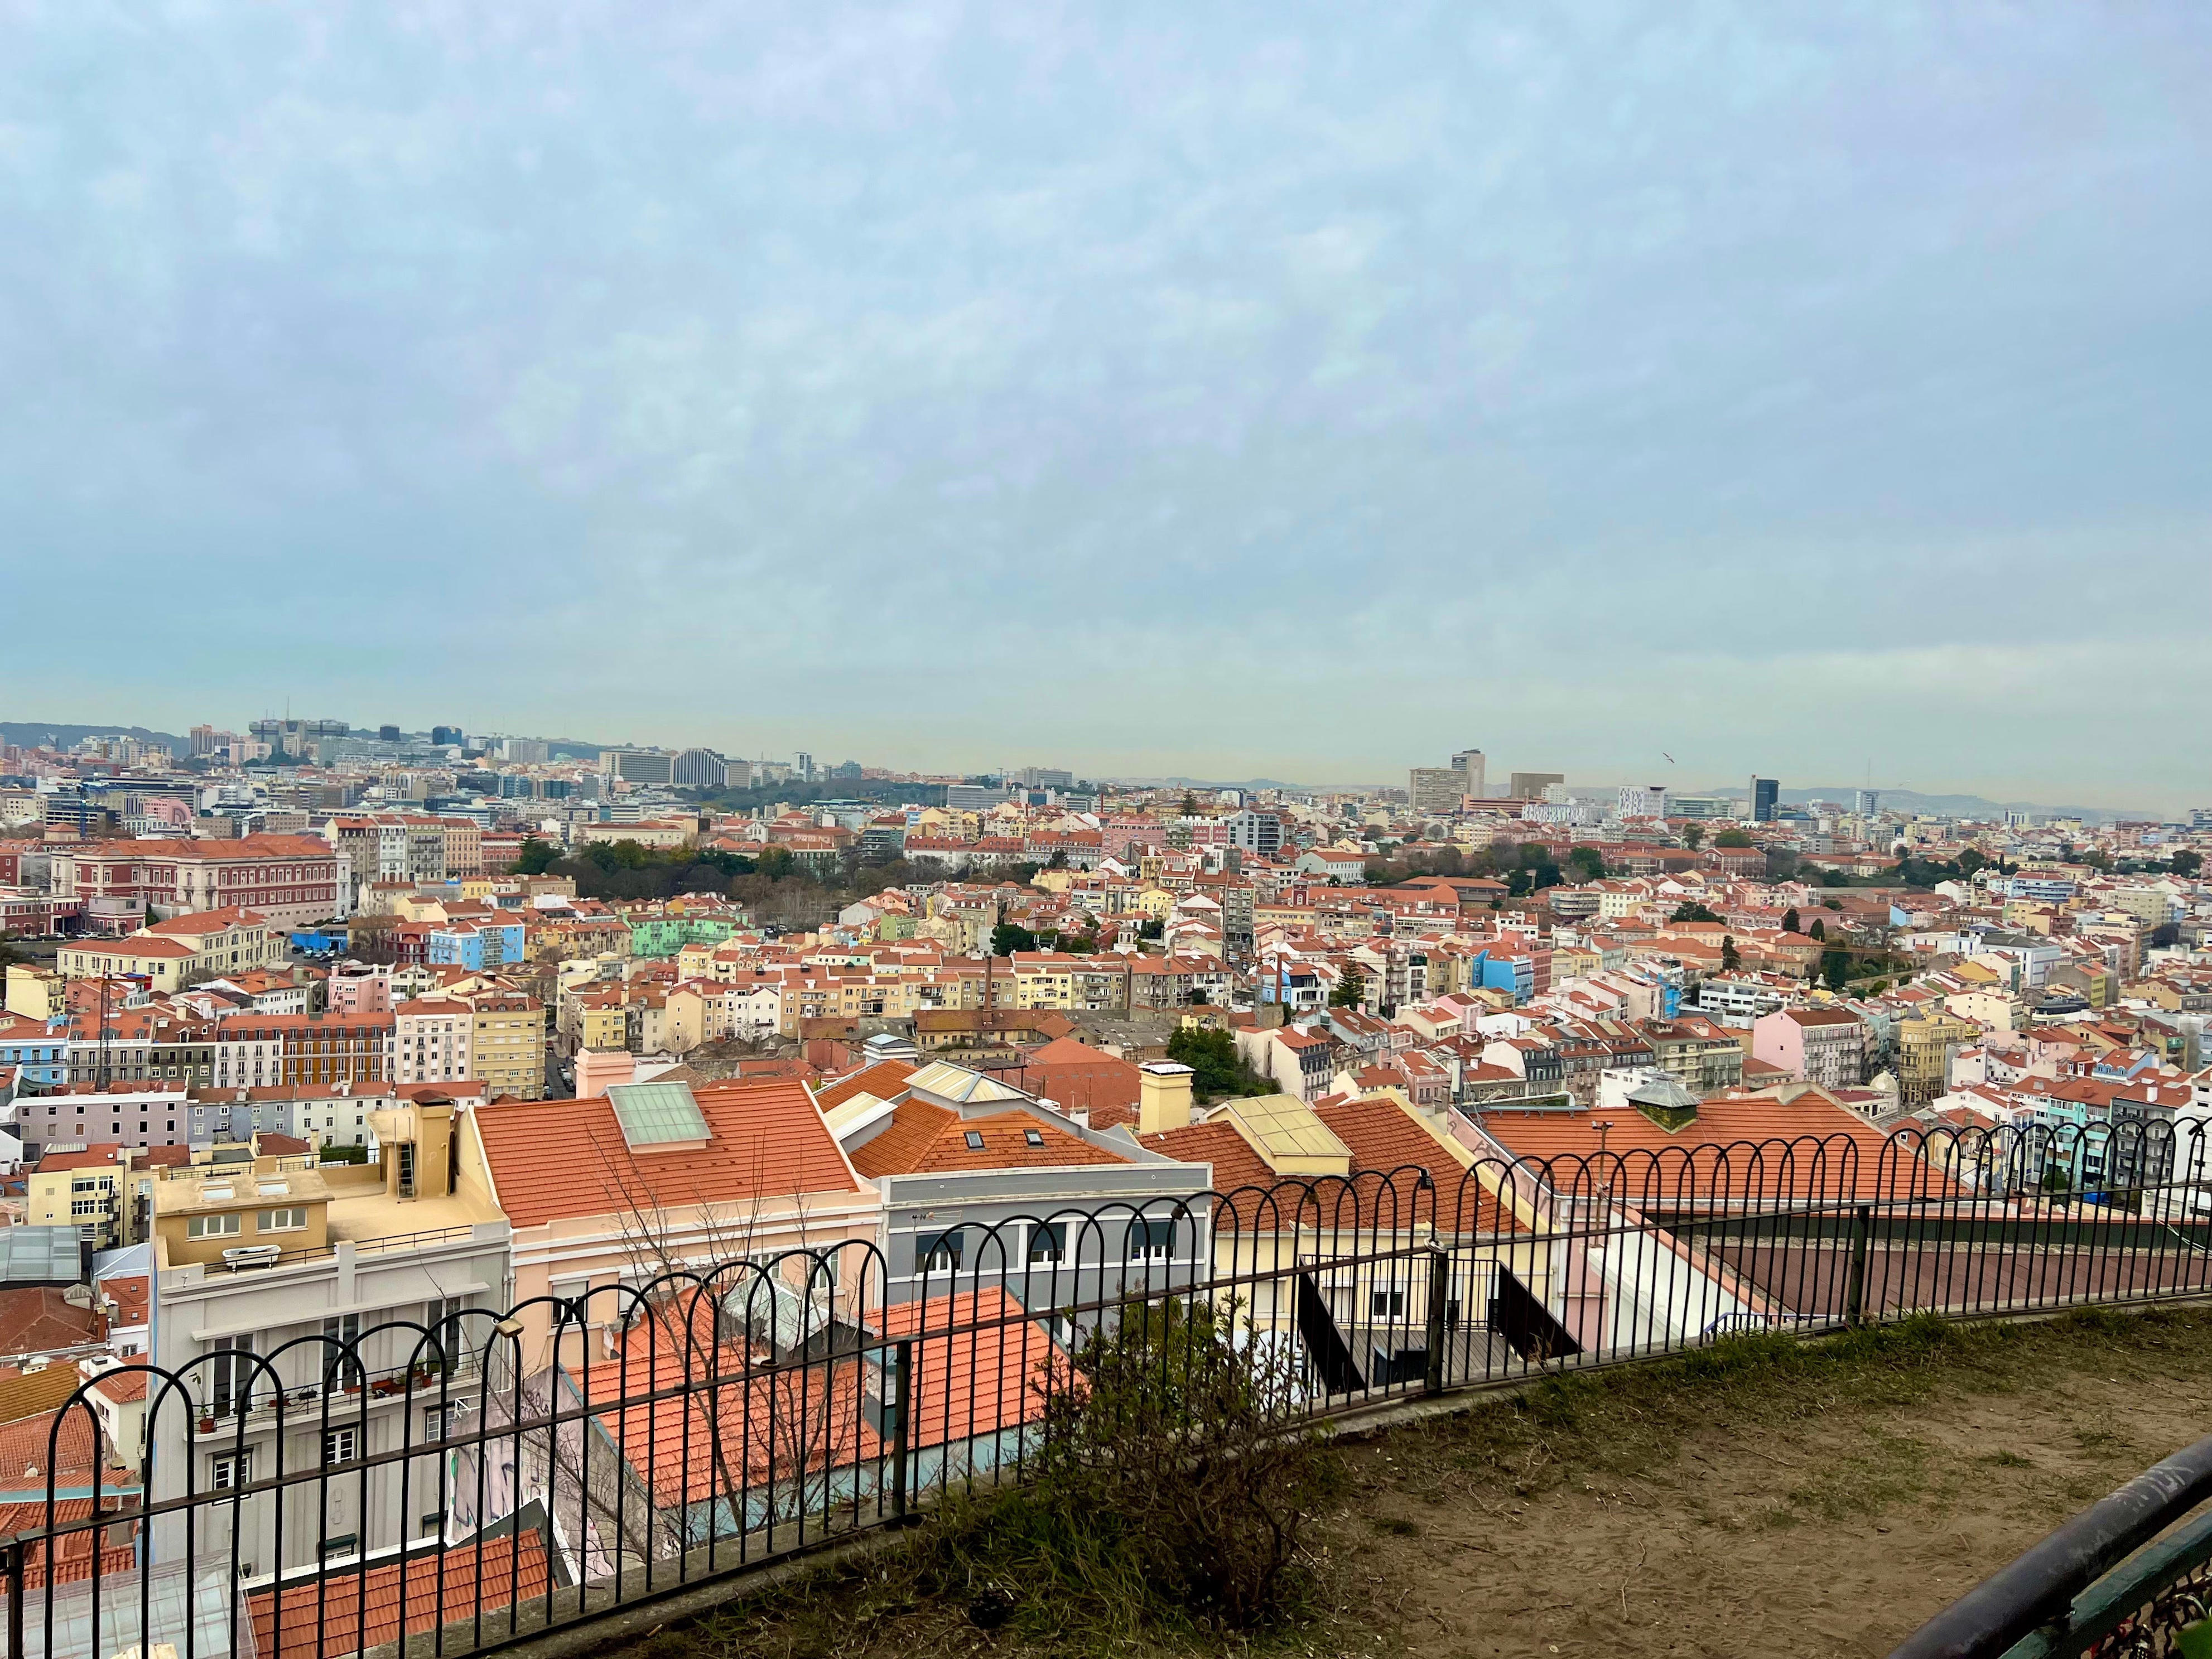 <p>After arriving in Lisbon, I was surprised by the city's beauty. Though I wouldn't put the Portuguese capital in the same category as Paris or Rome, I was still very impressed by its pastel-colored buildings, ornate tilework, and picturesque scenery.</p><p>I'd seen plenty of photos before I visited, but it was still surreal to see Lisbon in real life. </p><p>The miradouros, or viewpoints, were the best places to see the city. I visited as many as possible and was amazed by the incredible view at each one of them.</p><p>Overall, I'd recommend a visit to Lisbon. From its beauty to its charming neighborhoods, the city is like a real-life watercolor painting.</p><p><em>This story was originally published on August 31, 2022, and most recently updated on June 24, 2024.</em></p>